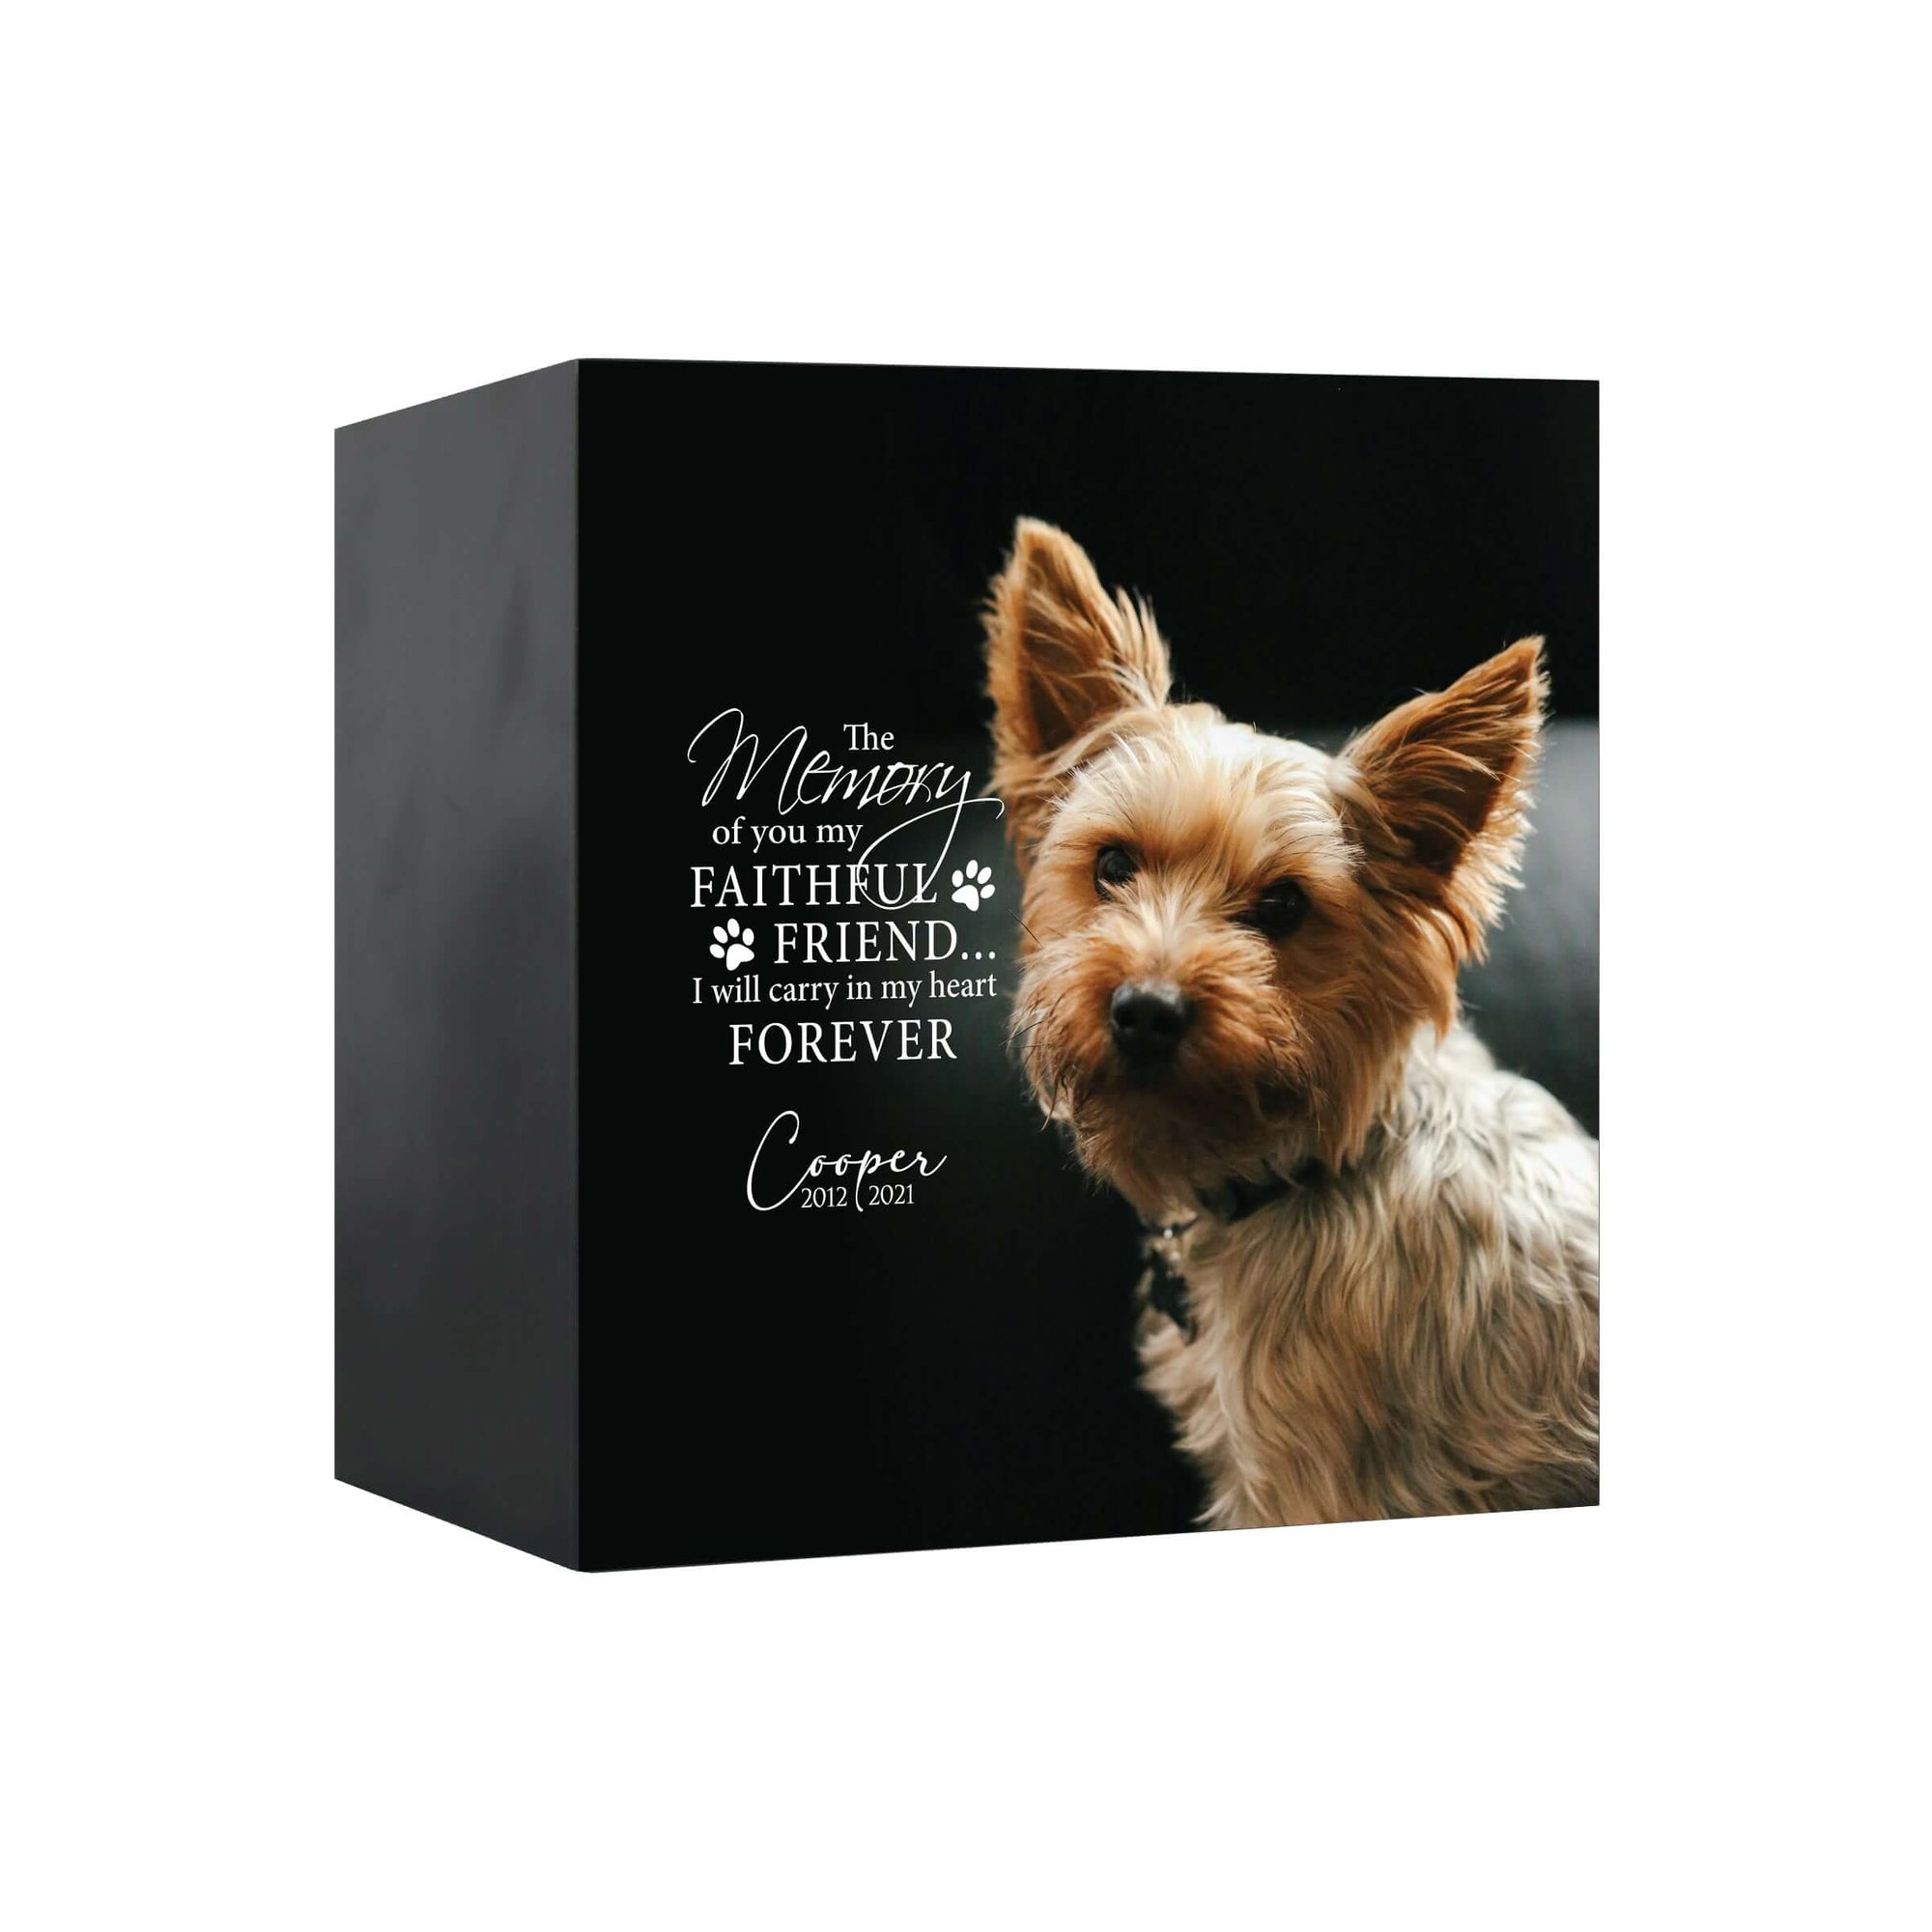 Pet Memorial Custom Photo Shadow Box Cremation Urn - The Memory Of You